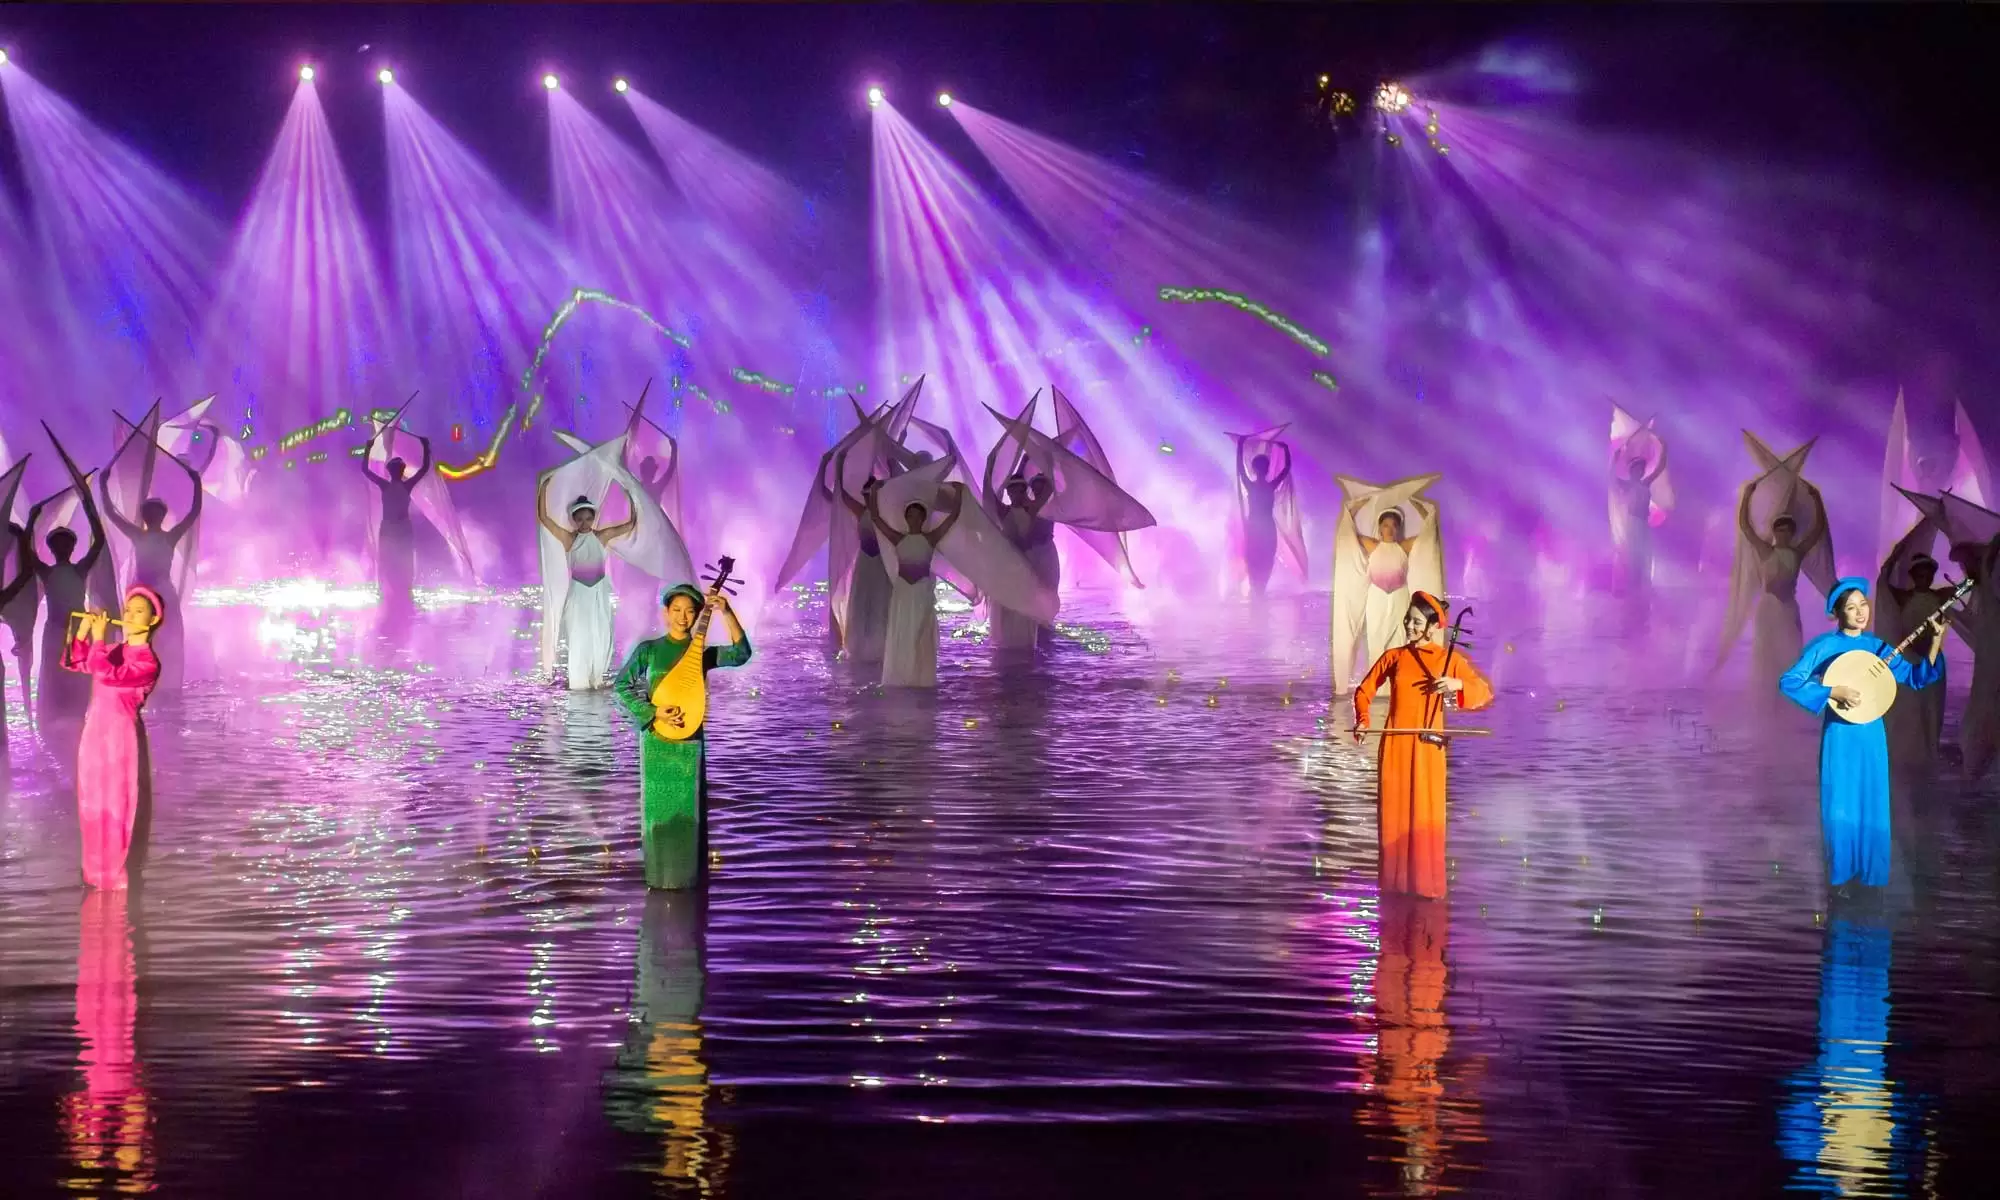 The Quintessence of Tonkin Show - A cultural experience in Hanoi 